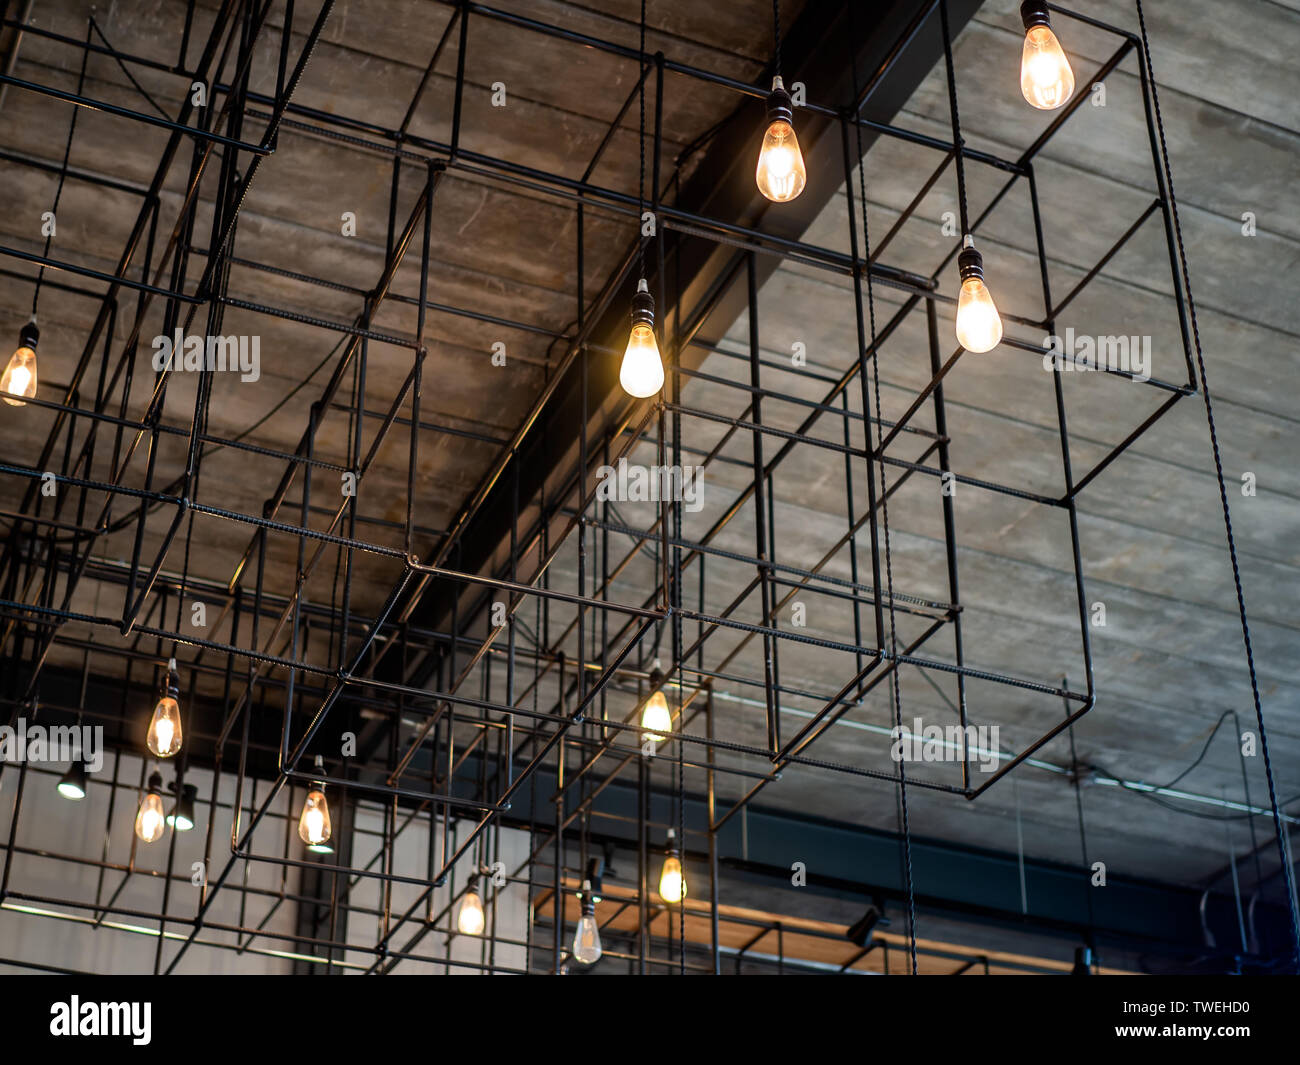 Modern Ceiling Light Or Light Bulbs Hanging With Steel Bars From